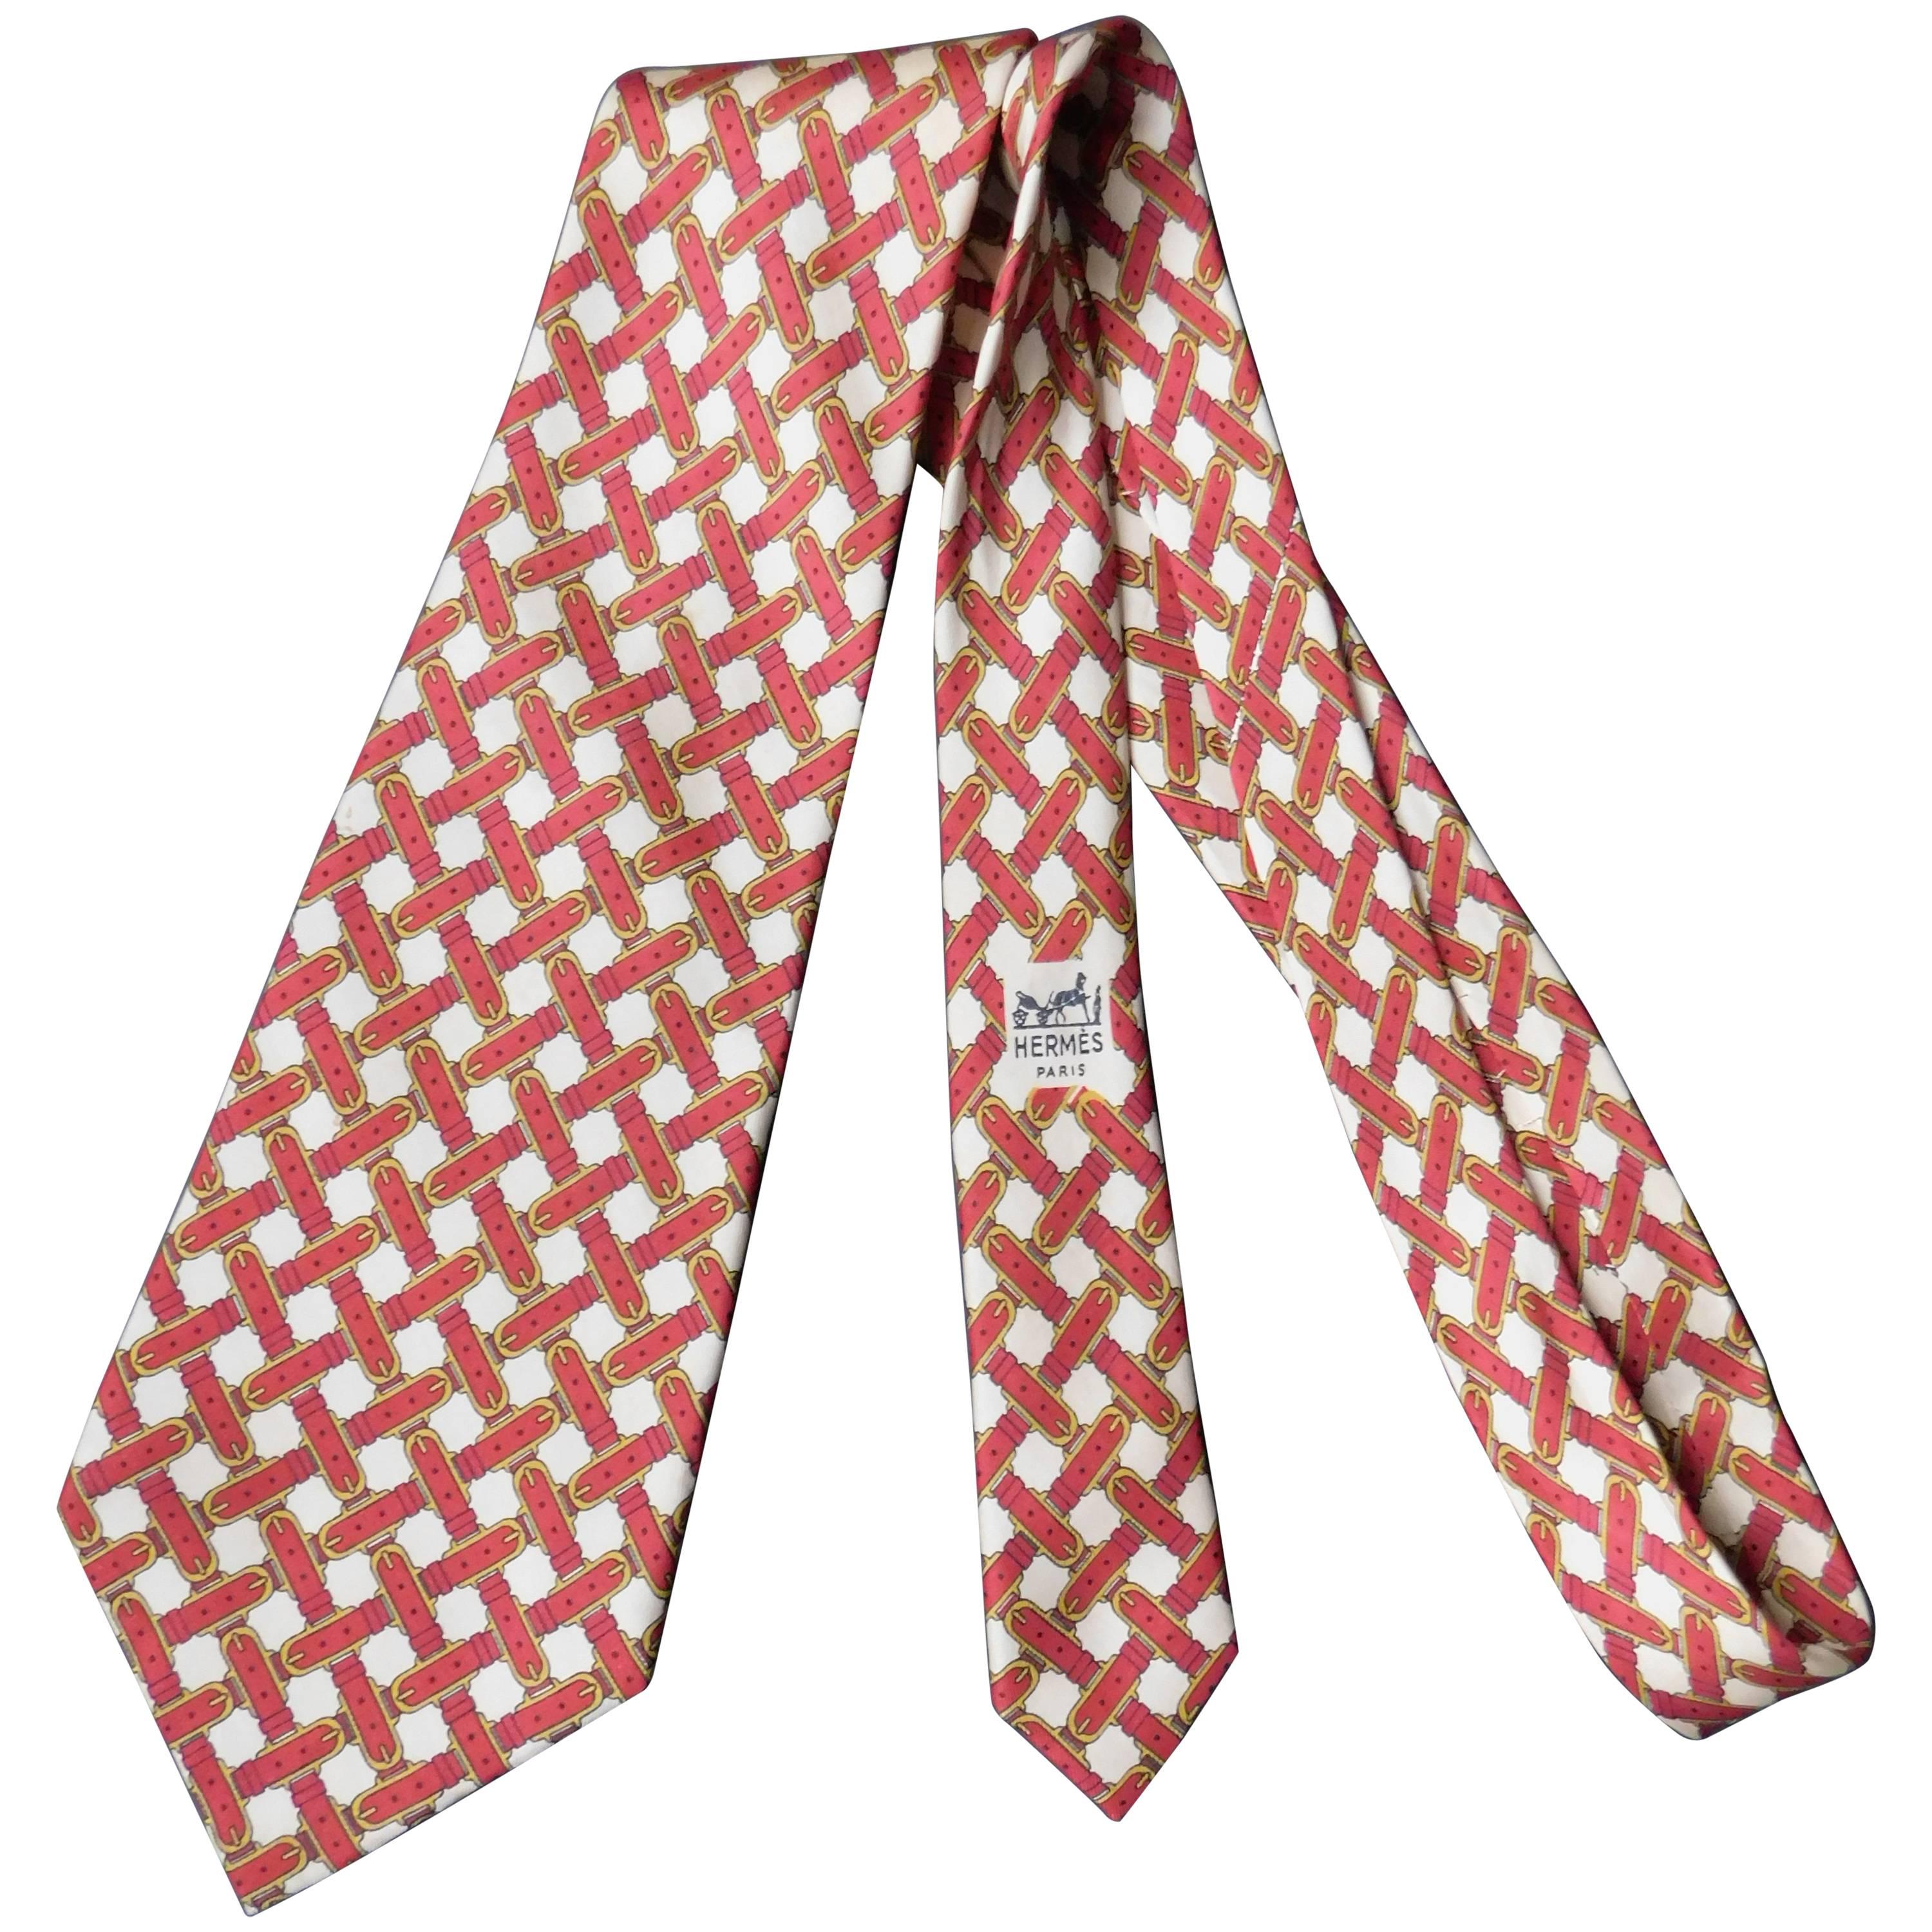 Hermes Silk Tie printed with Woven Saddle Stirrup Buckles